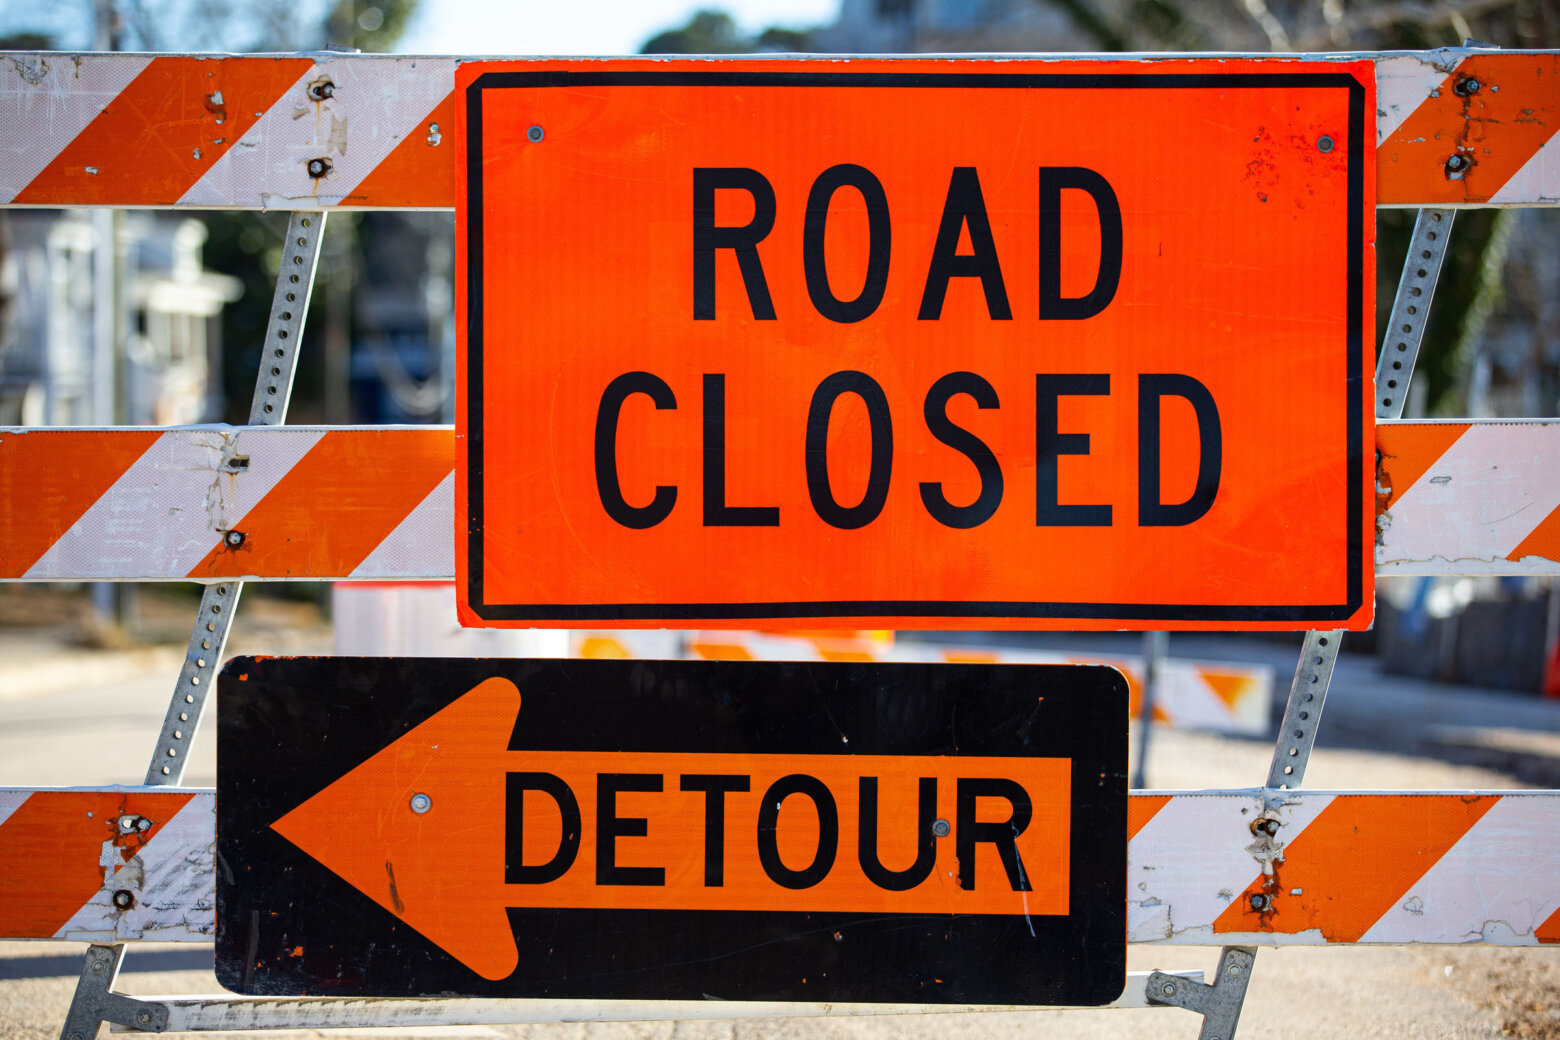 "Road closed" and "detour: signs